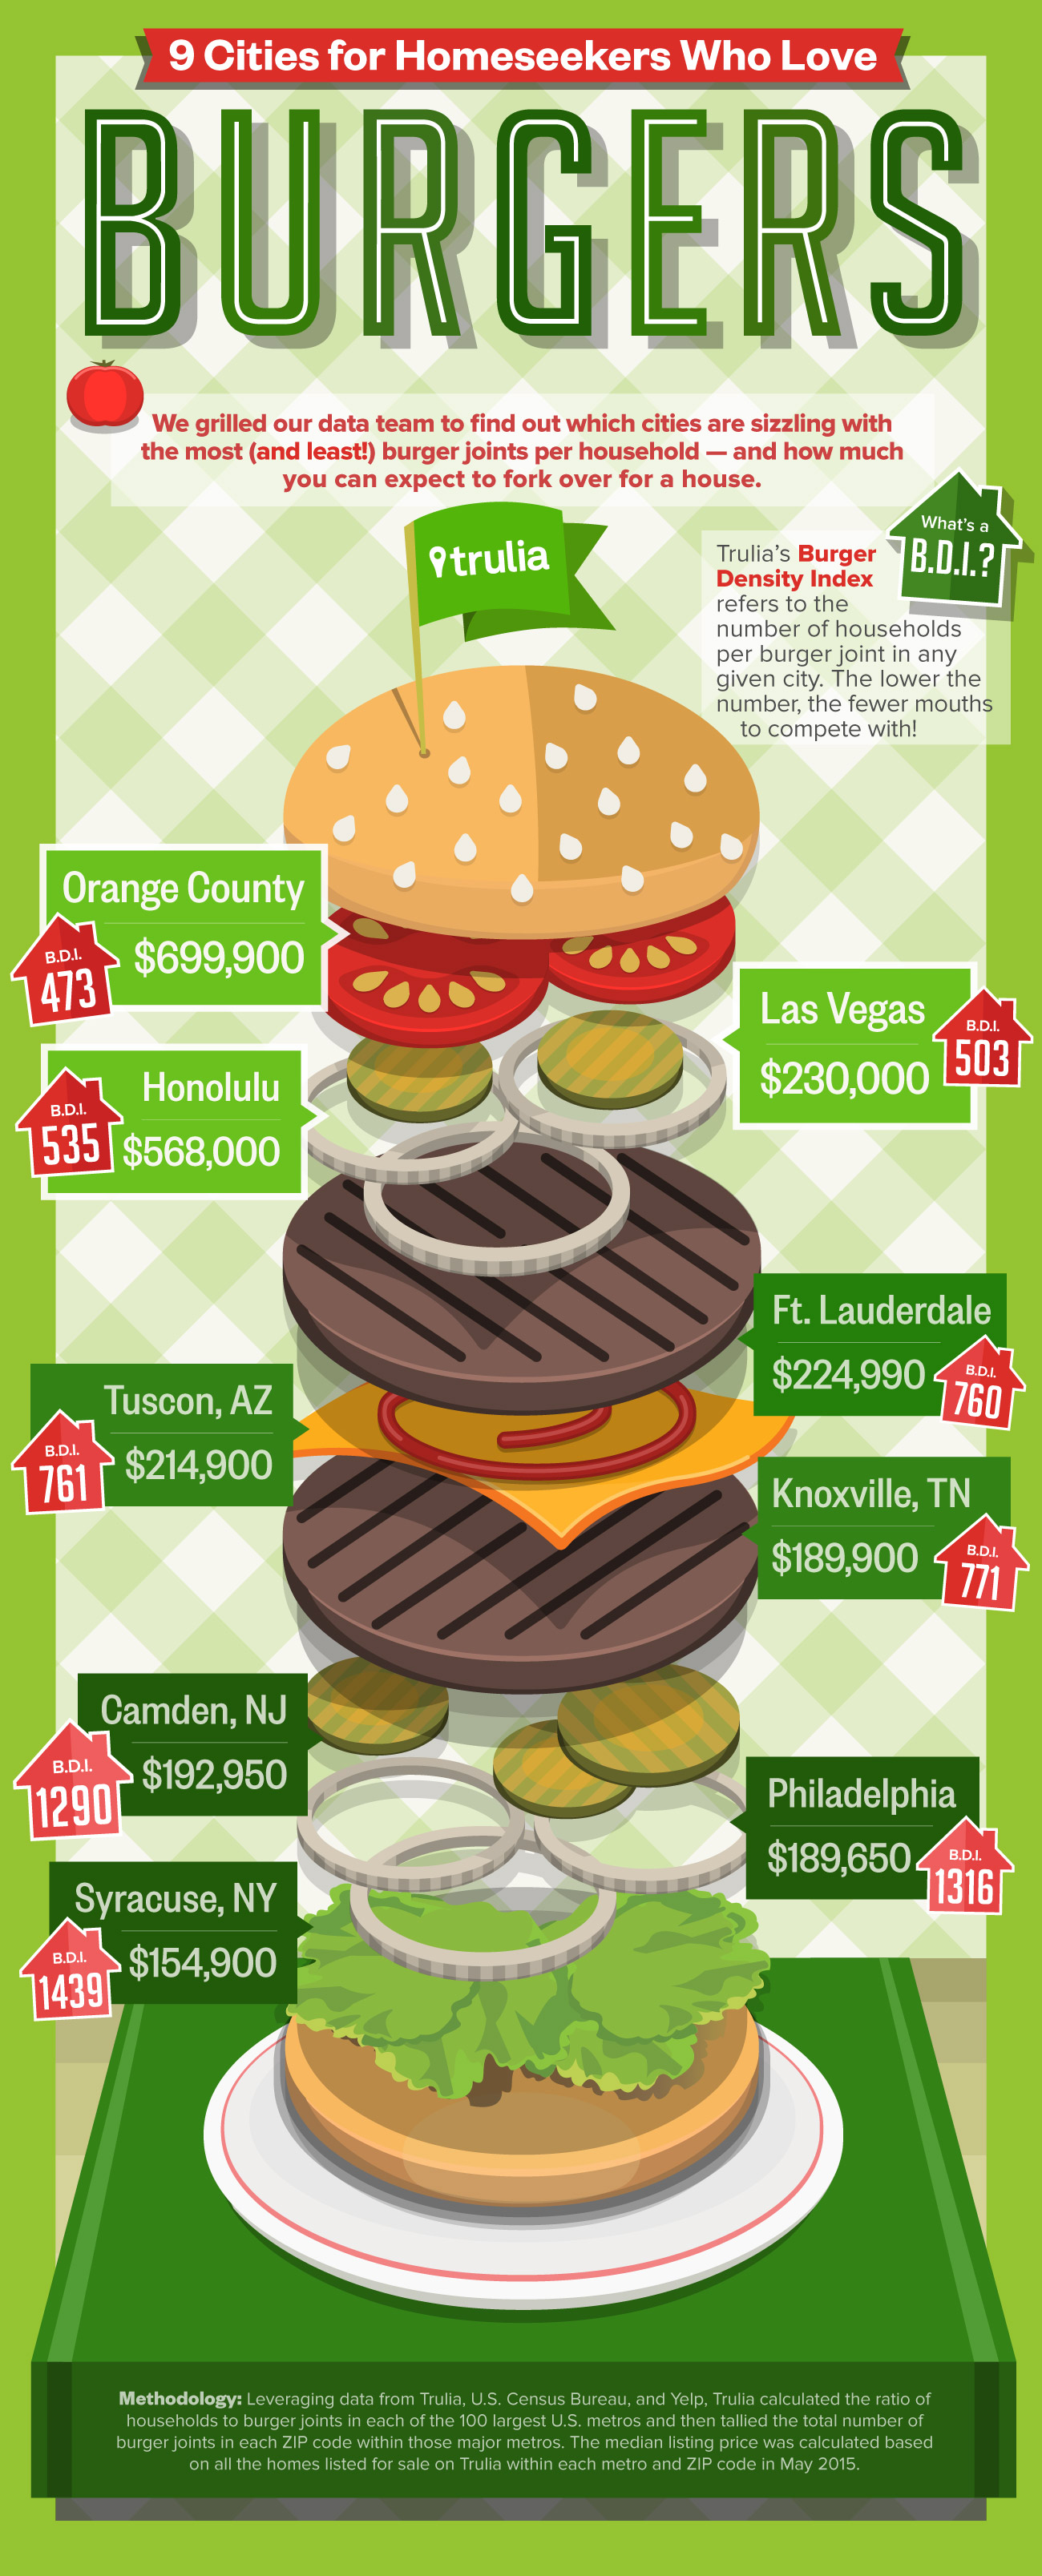 May2015-Trulia-9-Cities-for-Homeseekers-Who-Love-Burgers-Infographic